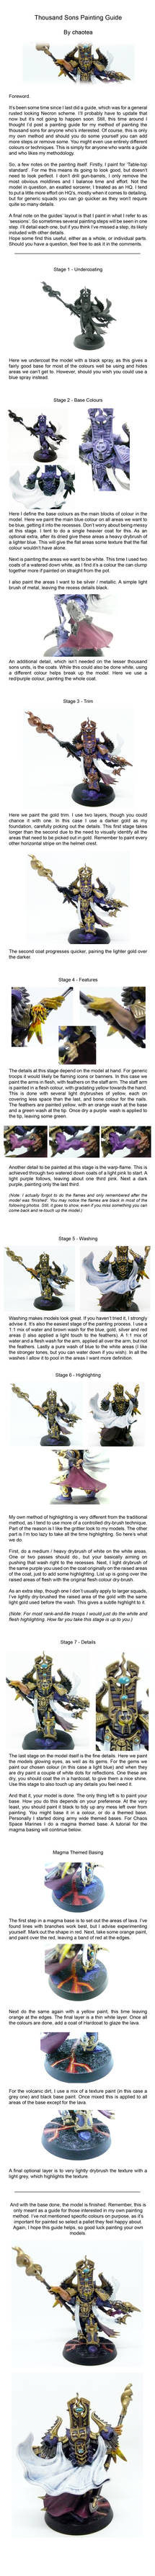 Thousand Sons Painting Guide